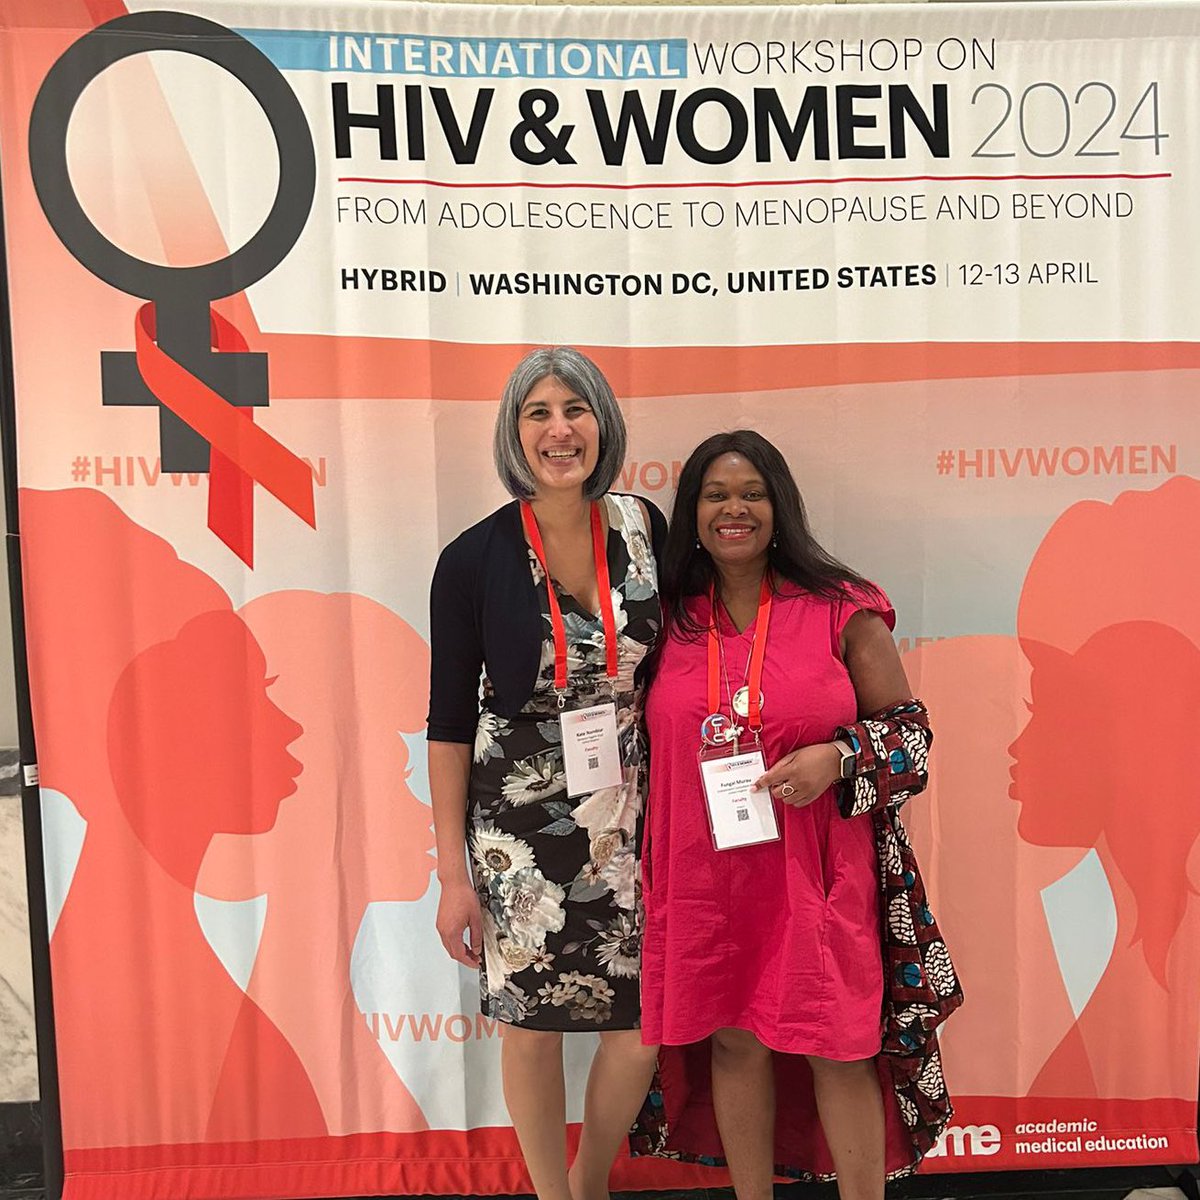 Kate Nambiar and Fungai Murau flying the @THTorguk flag and leading important work at #HIVWOMEN in Washington DC. Proud!